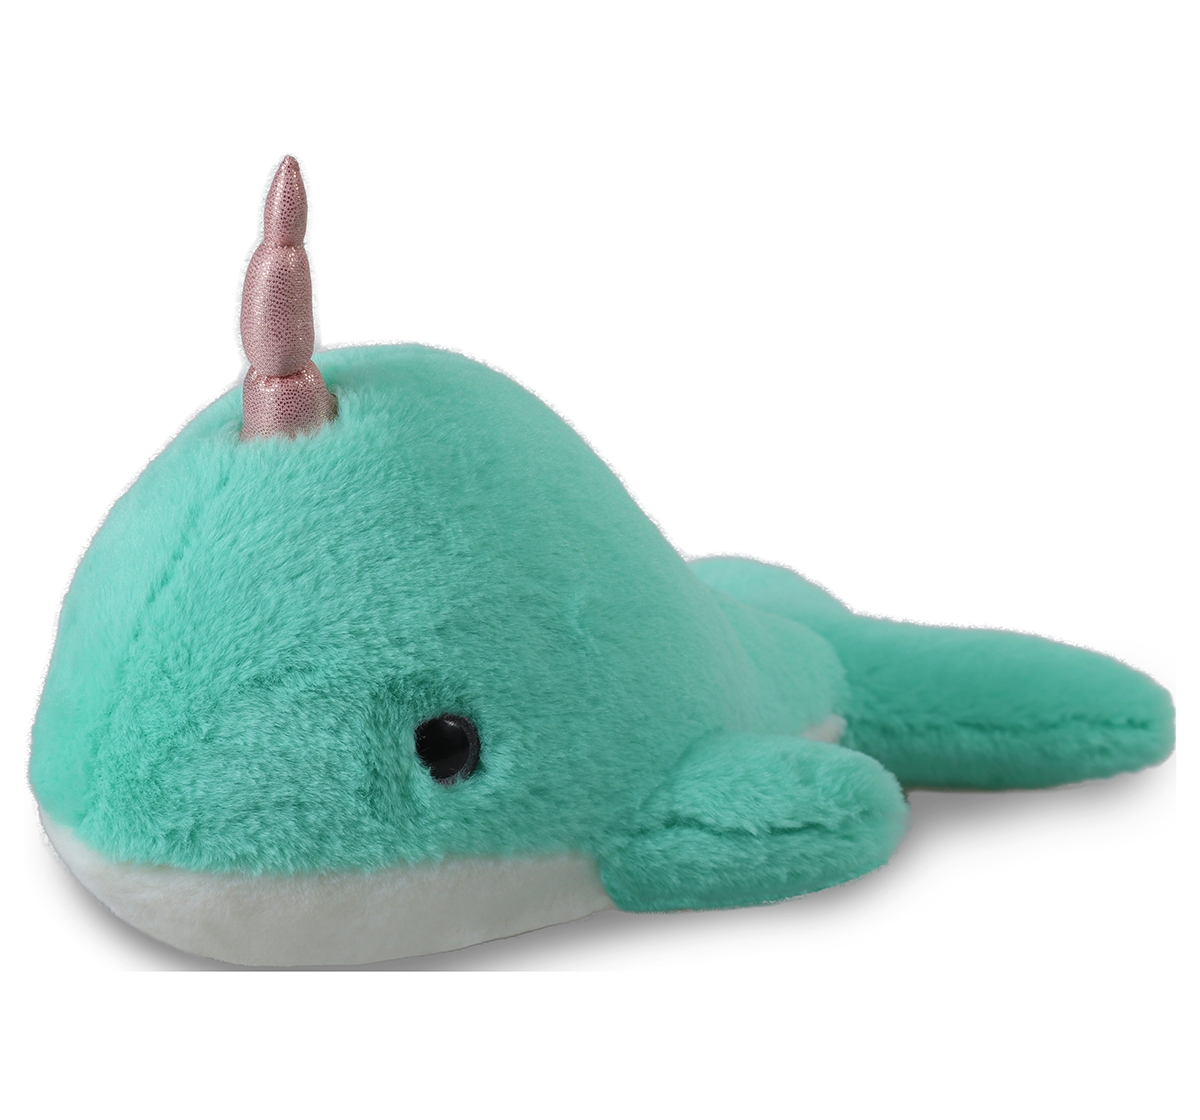 Mirada | Adorable Stuffed Plush Narwhal by Mirada, Soft Toys for Kids of All Ages, 3Y+, Green, 40cm 0